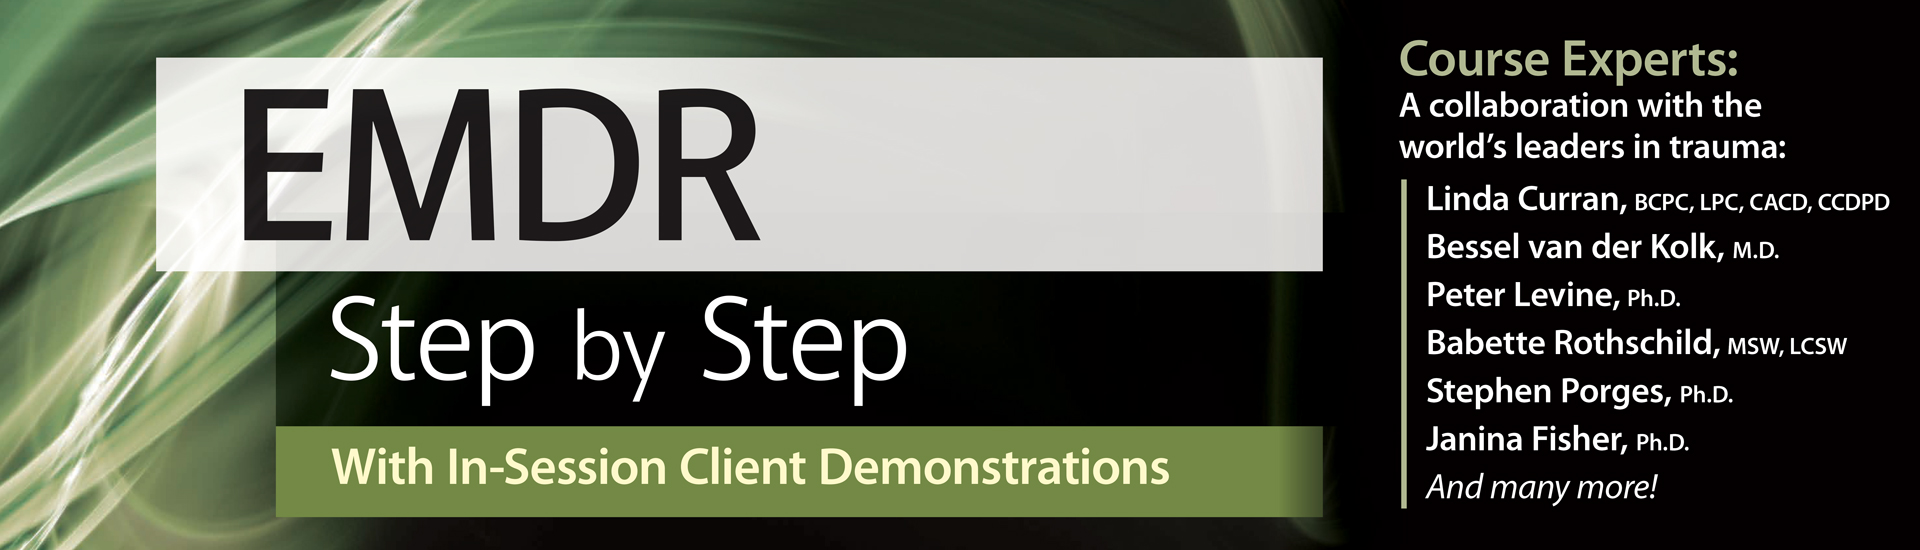 EMDR: Step by Step With In-Session Client Demonstrations